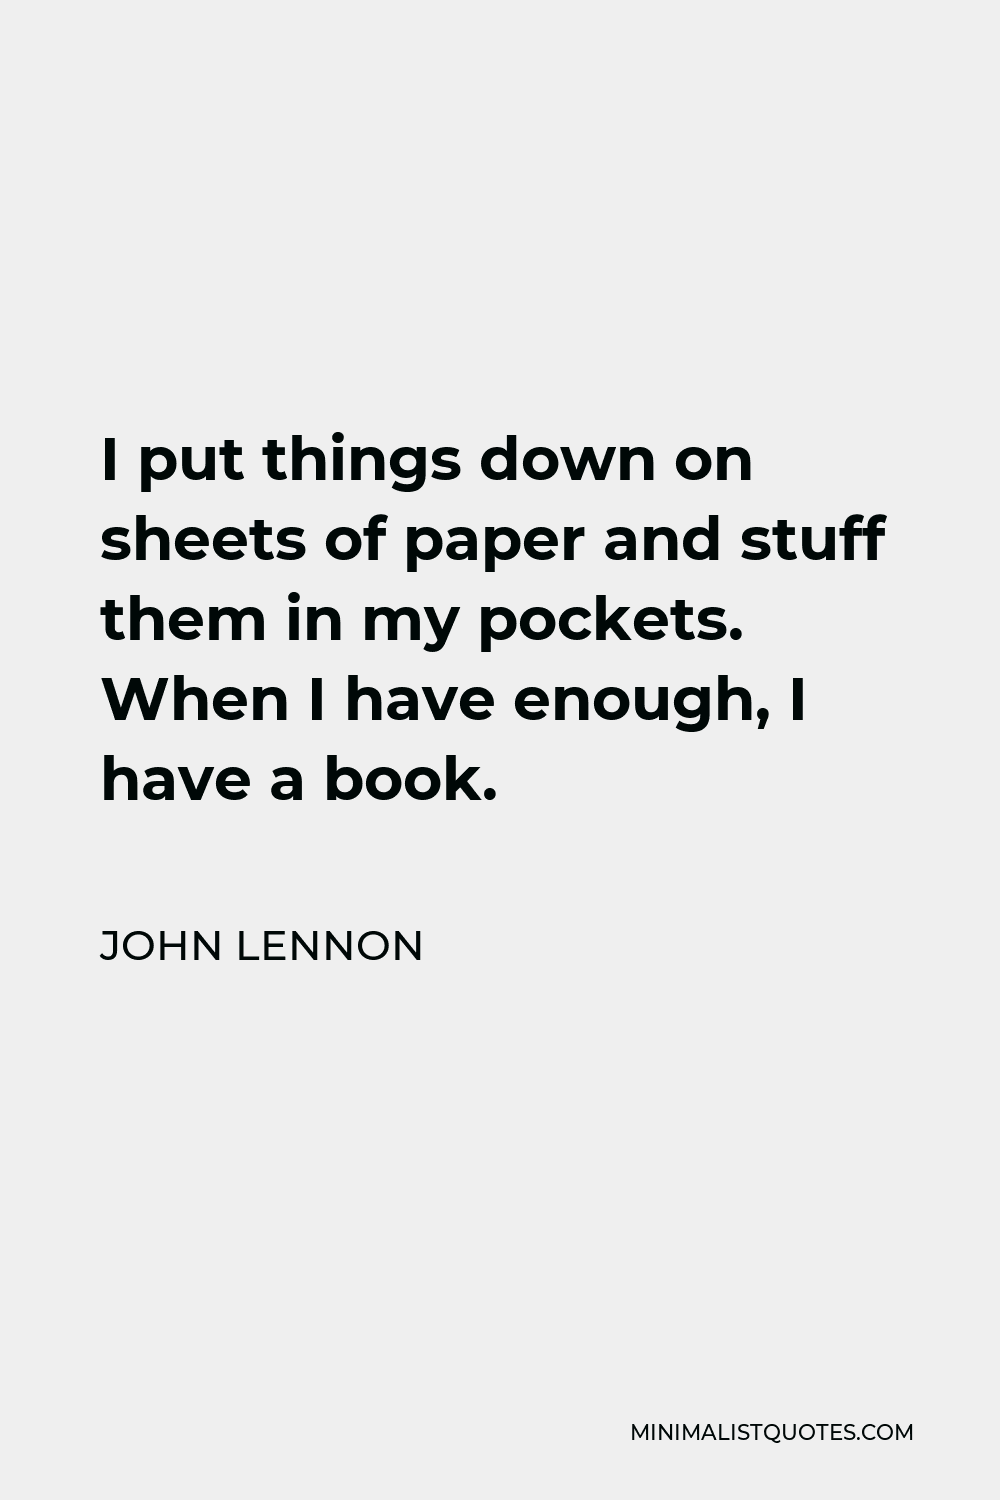 John Lennon Quote - I put things down on sheets of paper and stuff them in my pockets. When I have enough, I have a book.